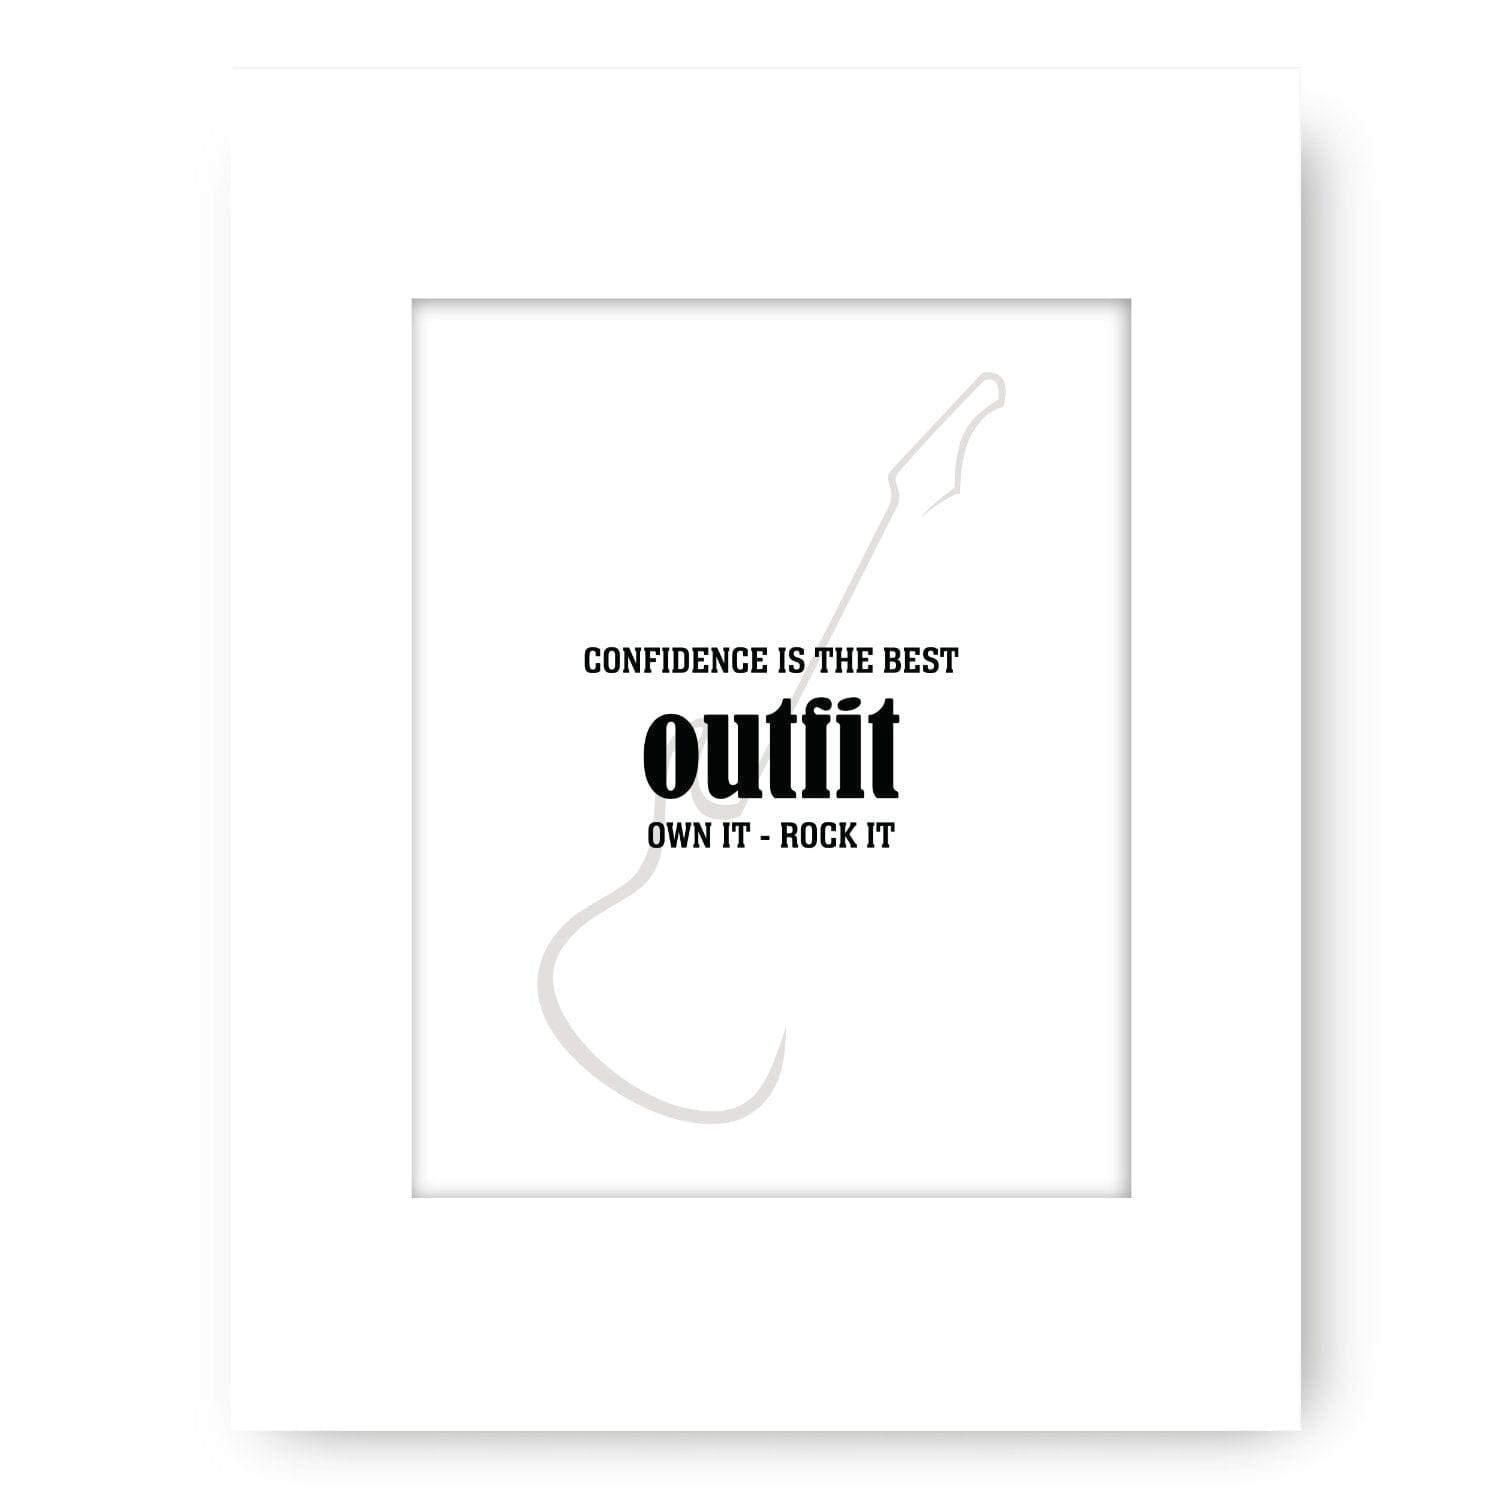 Wise & Witty Art - Confidence is the Best Outfit Own It Rock It Wise and Wiseass Quotes Song Lyrics Art 8x10 White Matted Print 